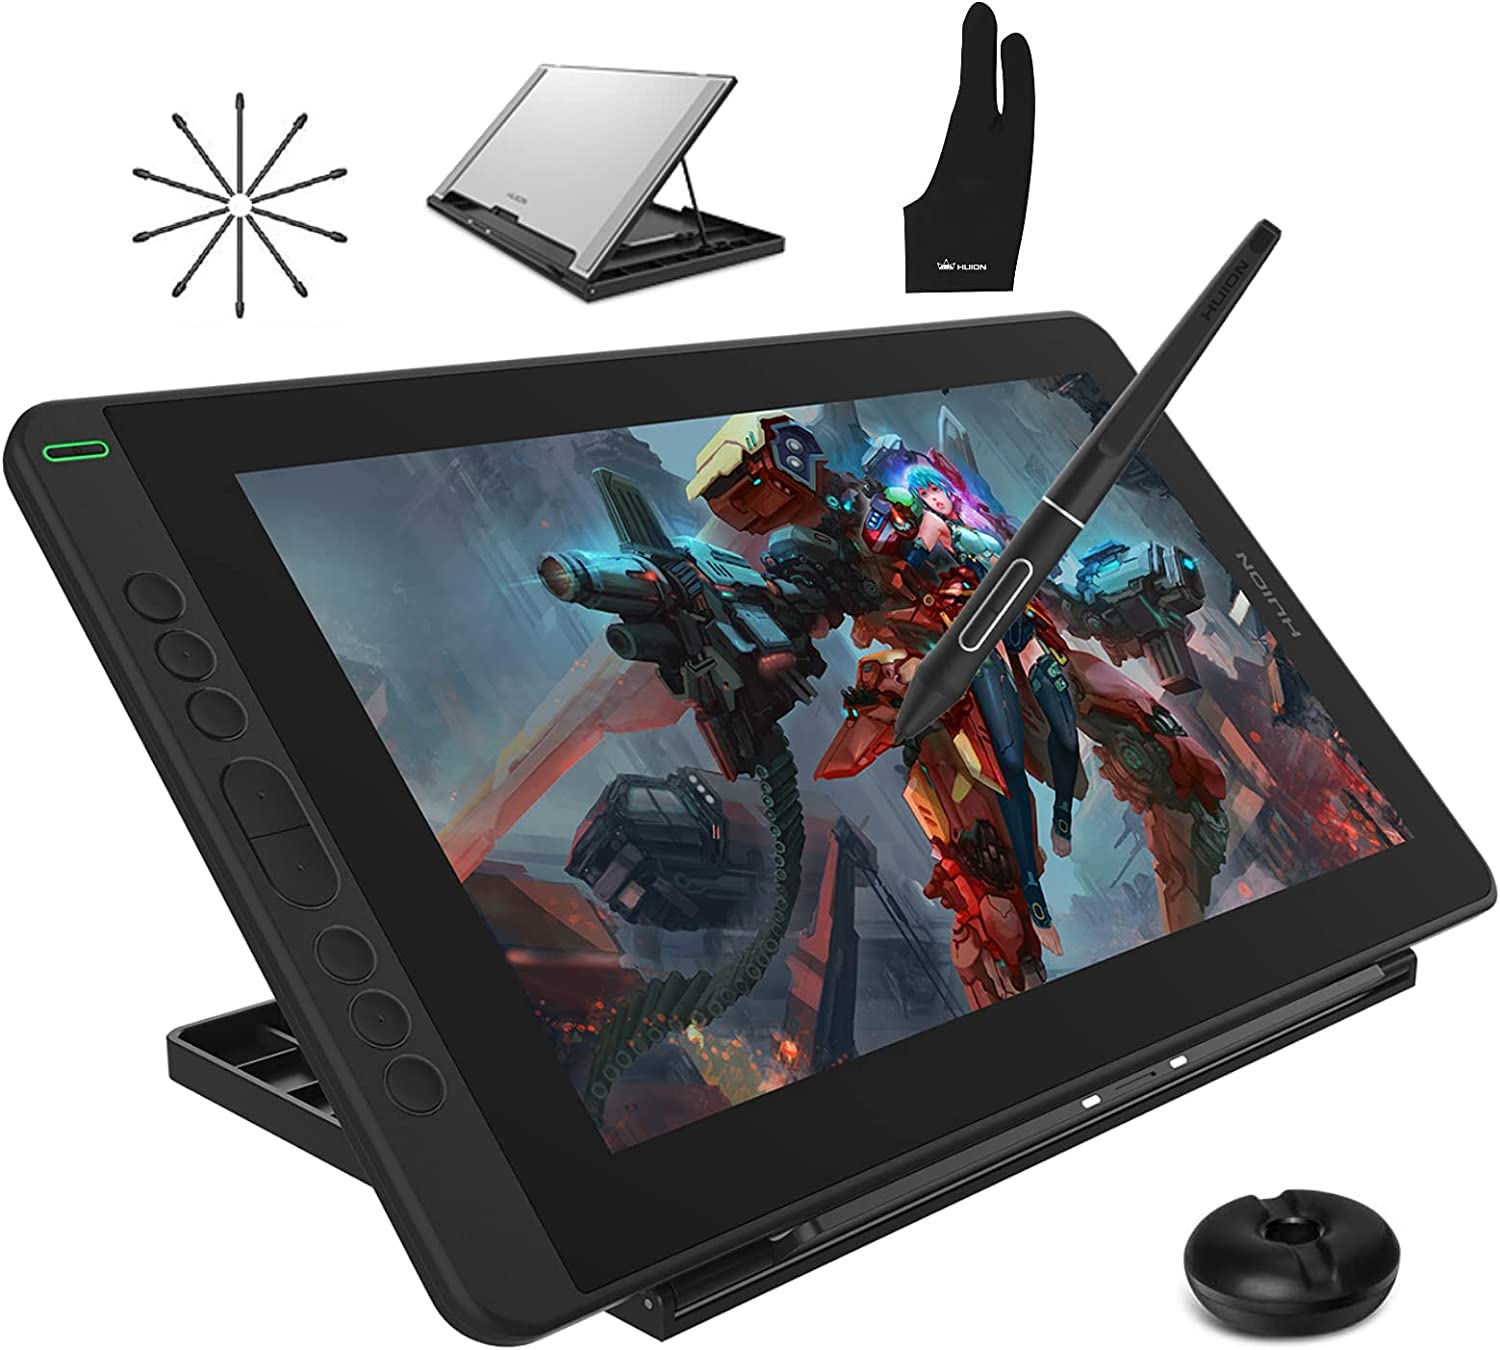 HUION Kamvas 13 Graphics Drawing Tablet with Screen [...]